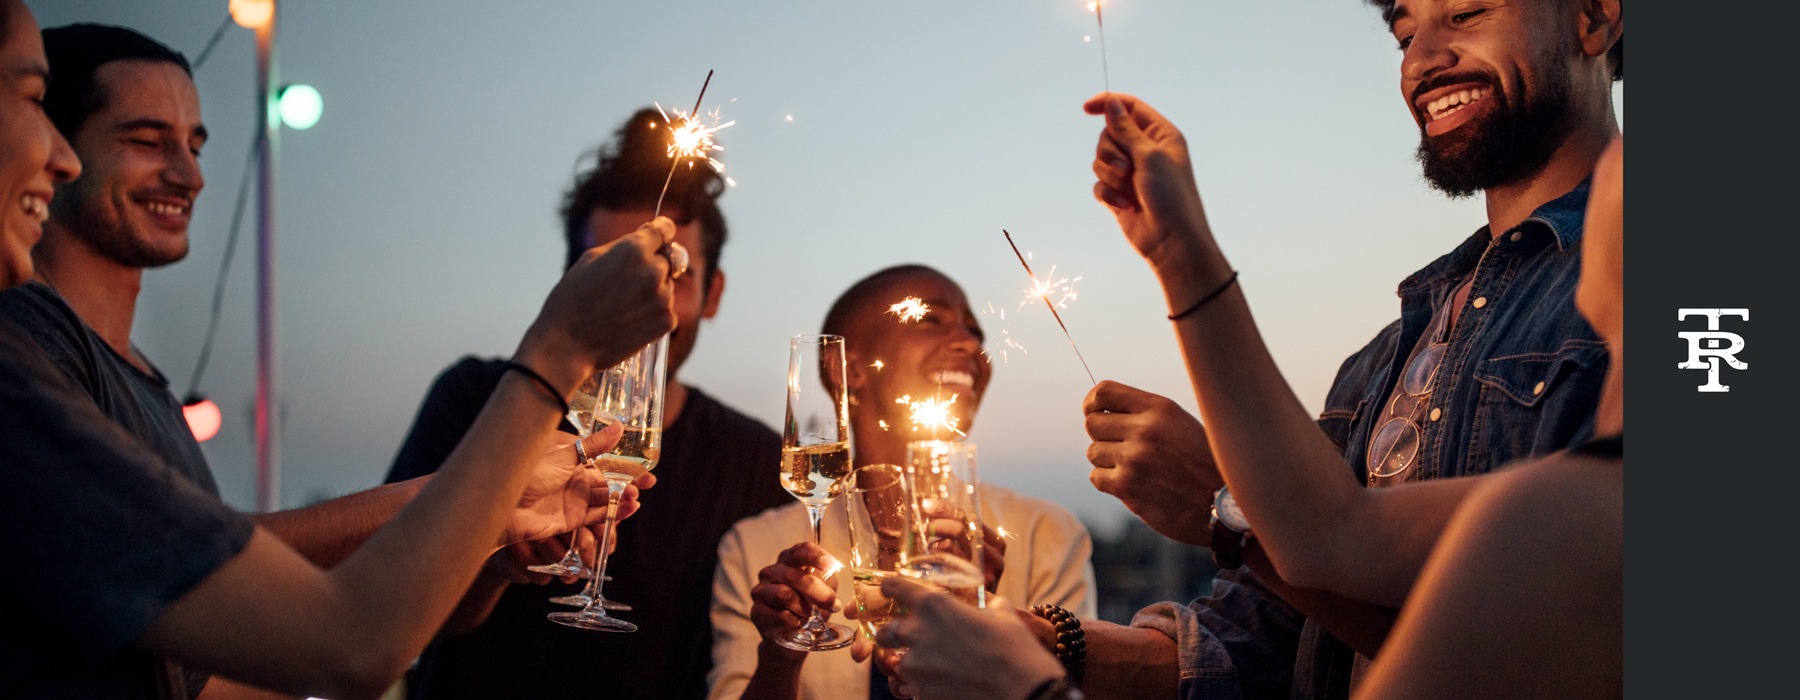 Lifestyle photo of friends with drinks and sparklers